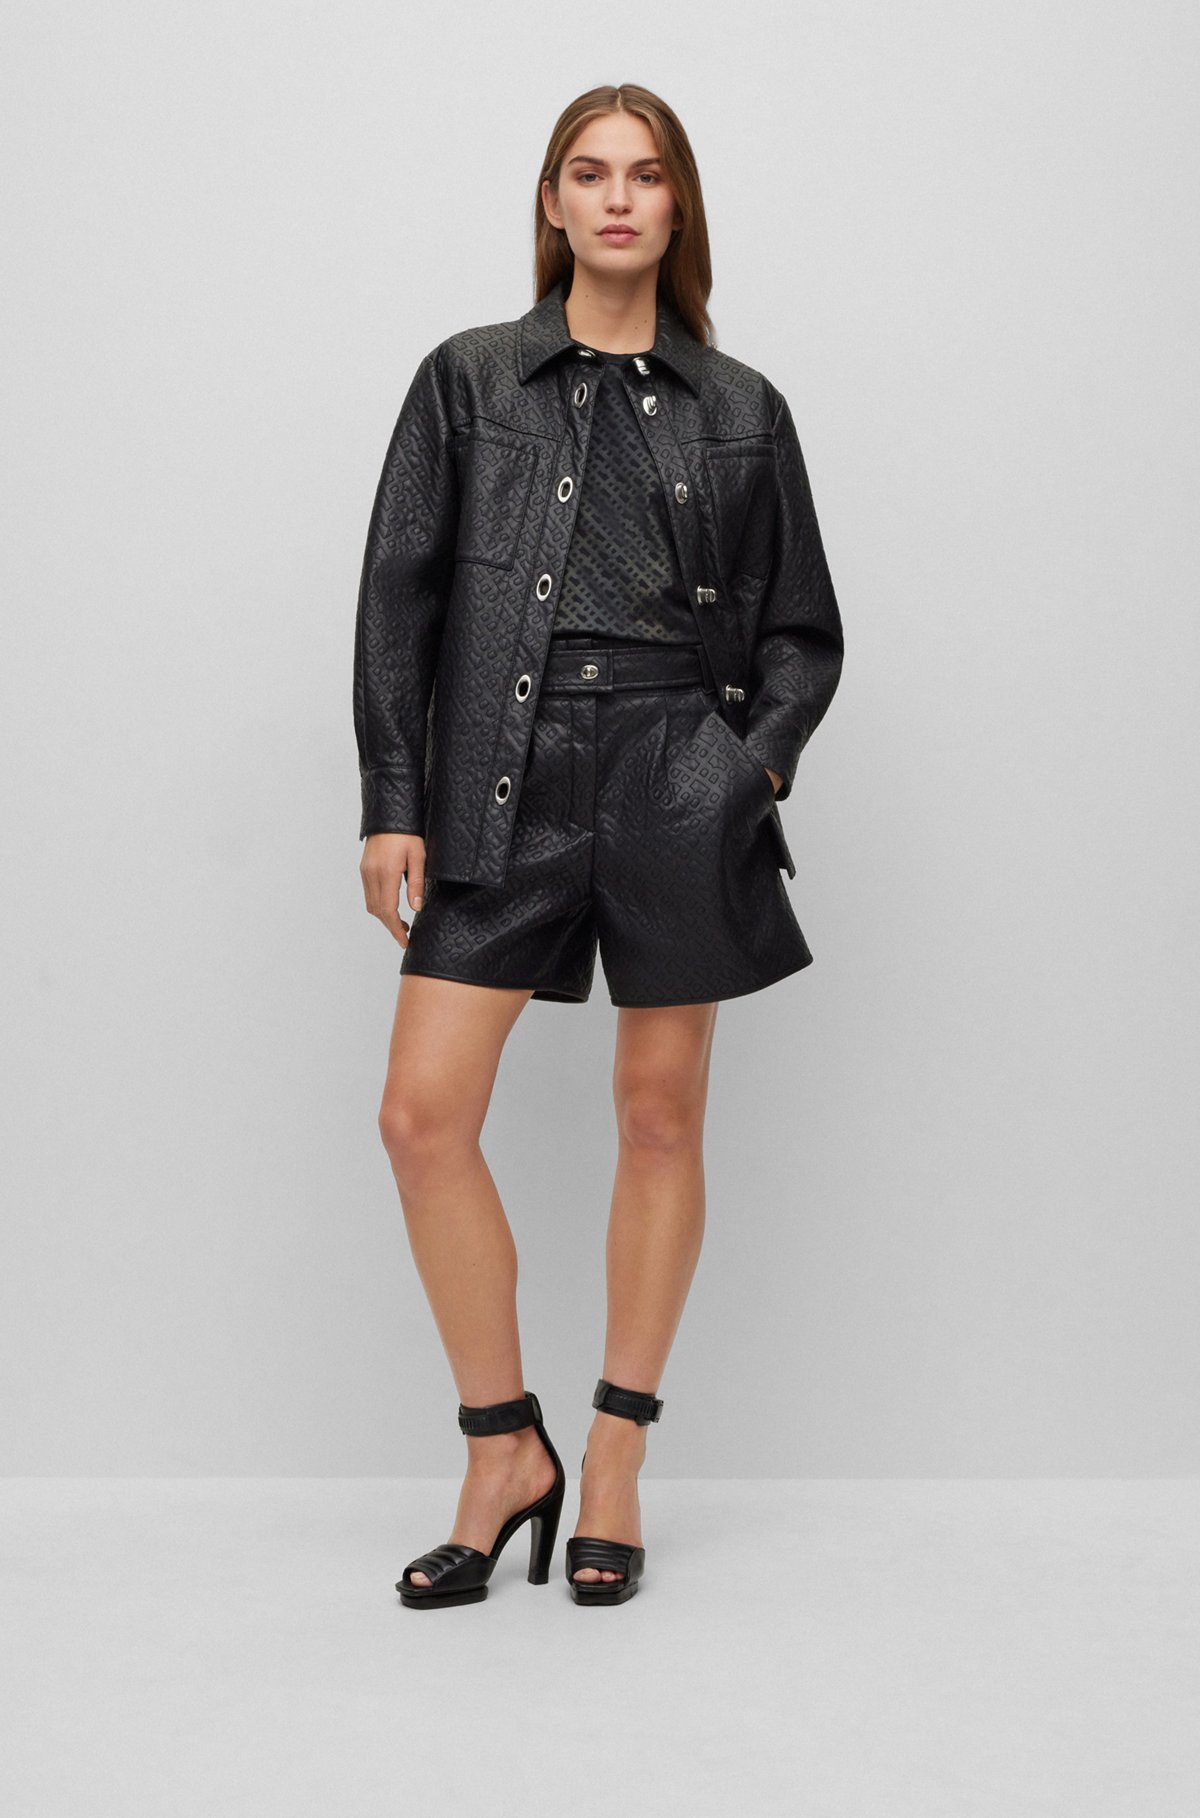 Relaxed-fit shorts in monogram-embossed faux leather, Black